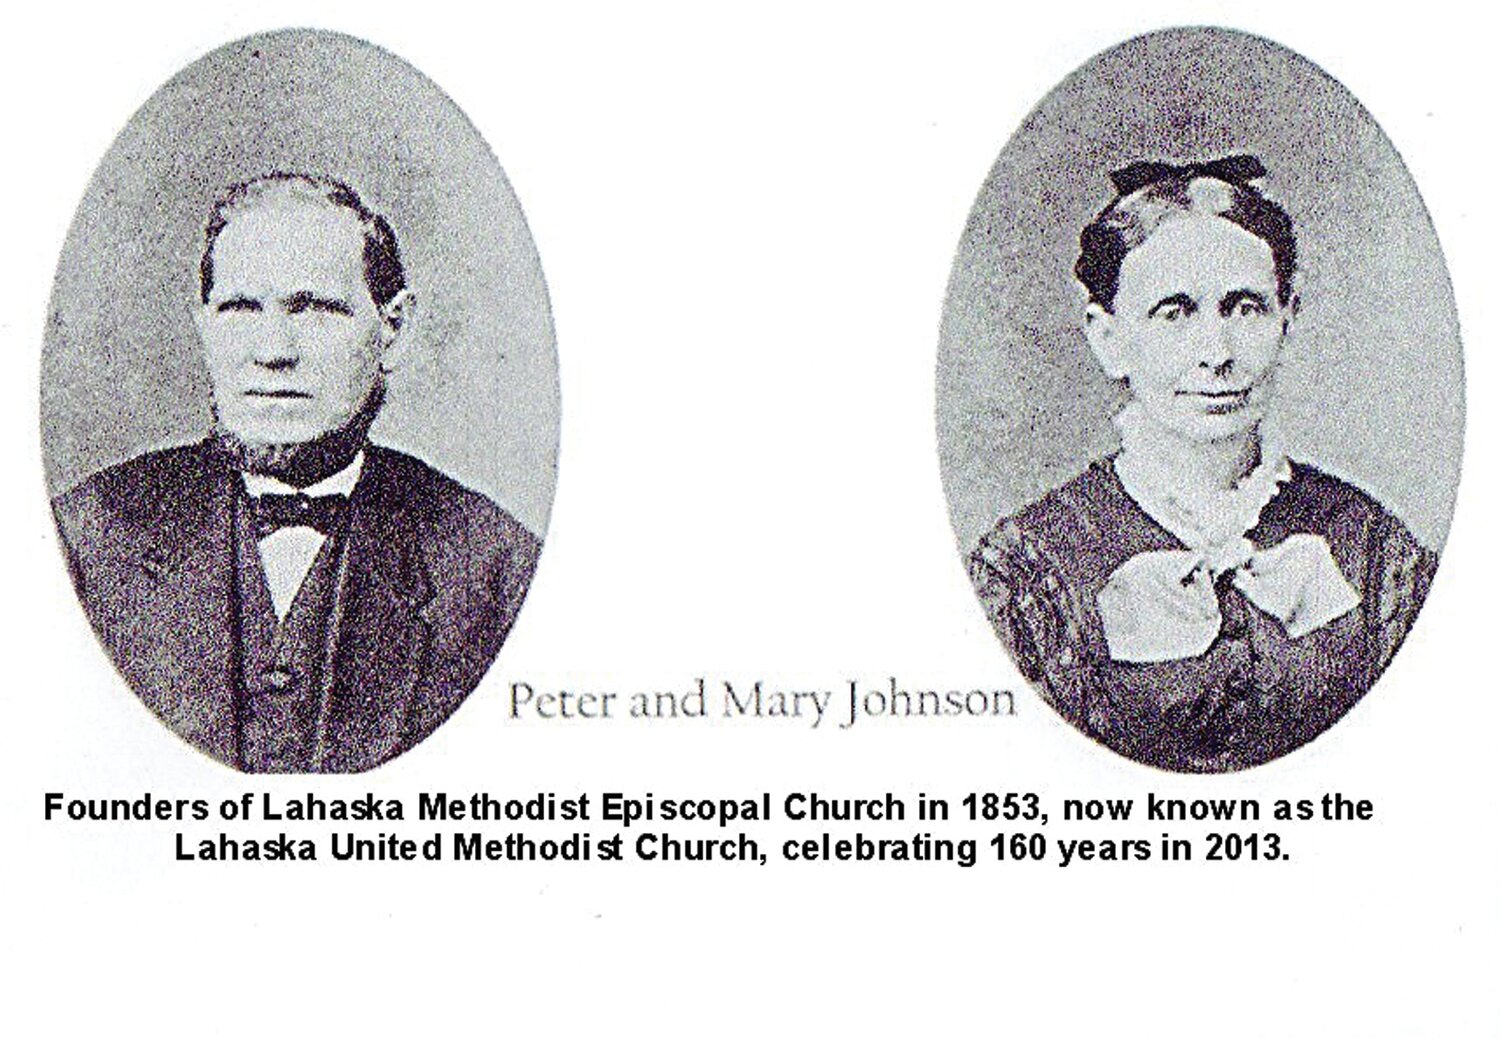 Church founders Peter and Mary Johnson.